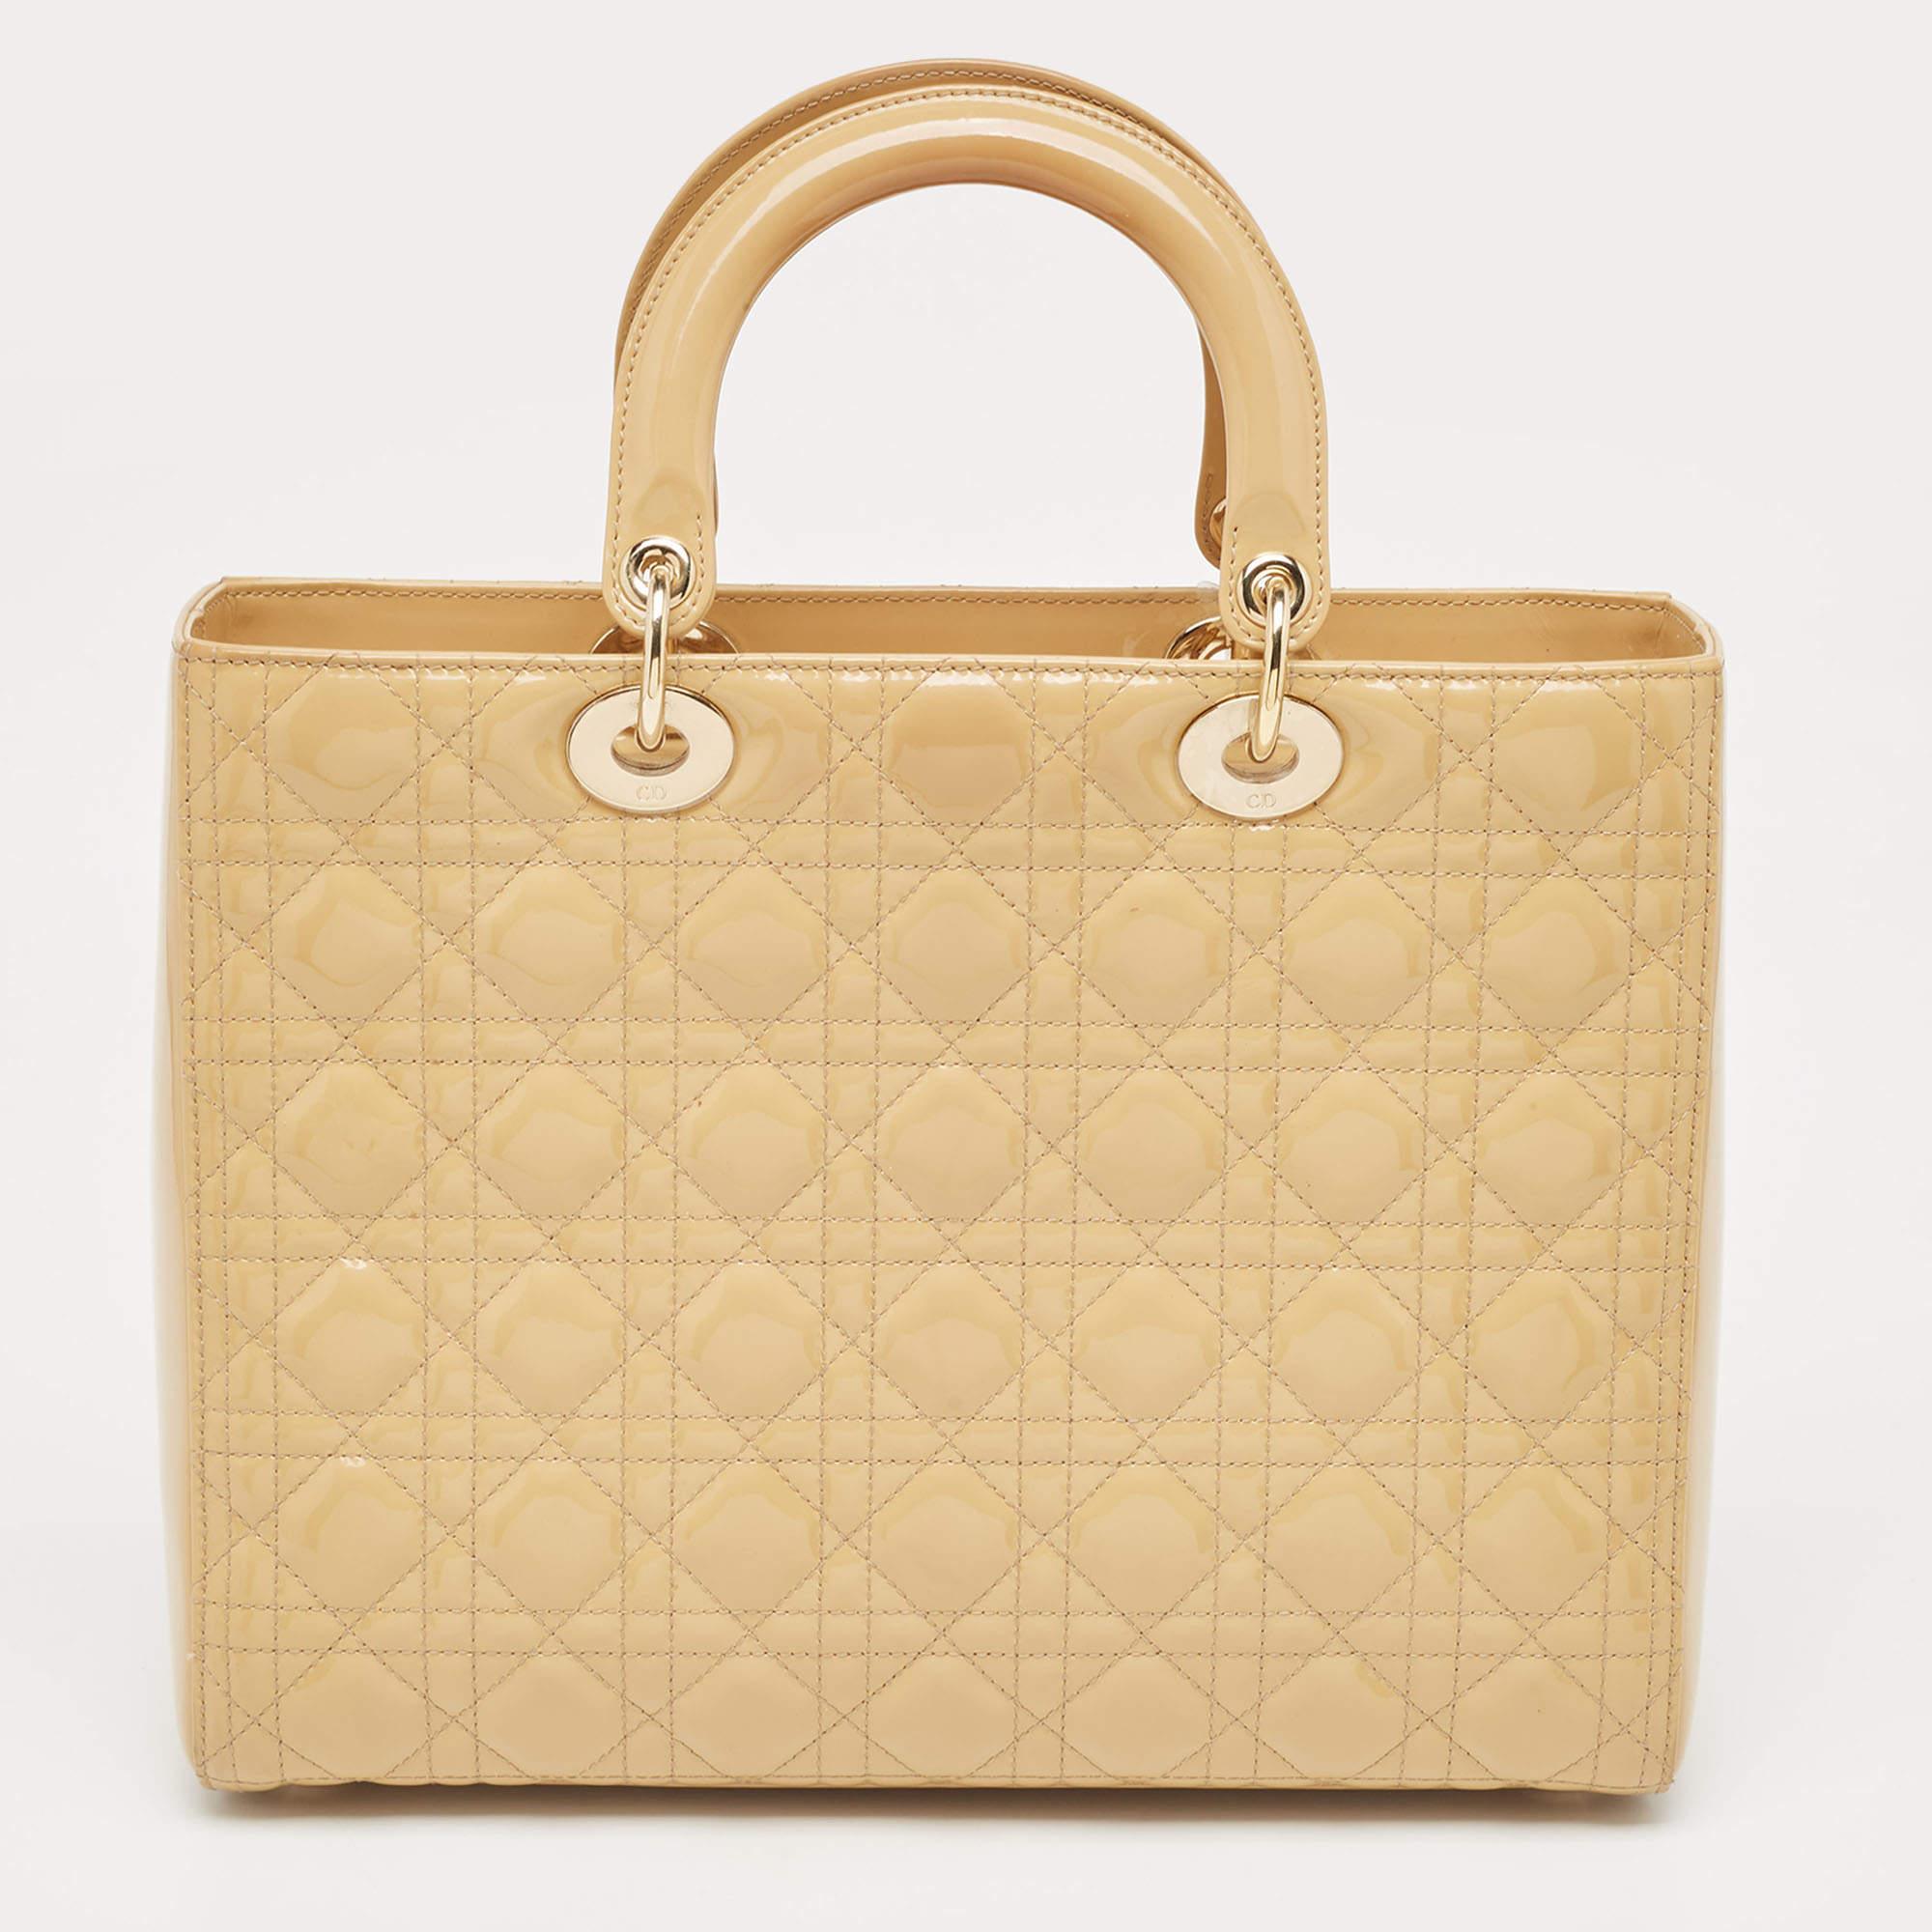 A timeless status and great design mark the Lady Dior tote. It is an iconic bag that people continue to invest in to this day. We have here this classic beauty crafted from beige Cannage patent leather. The bag has a lined interior for your